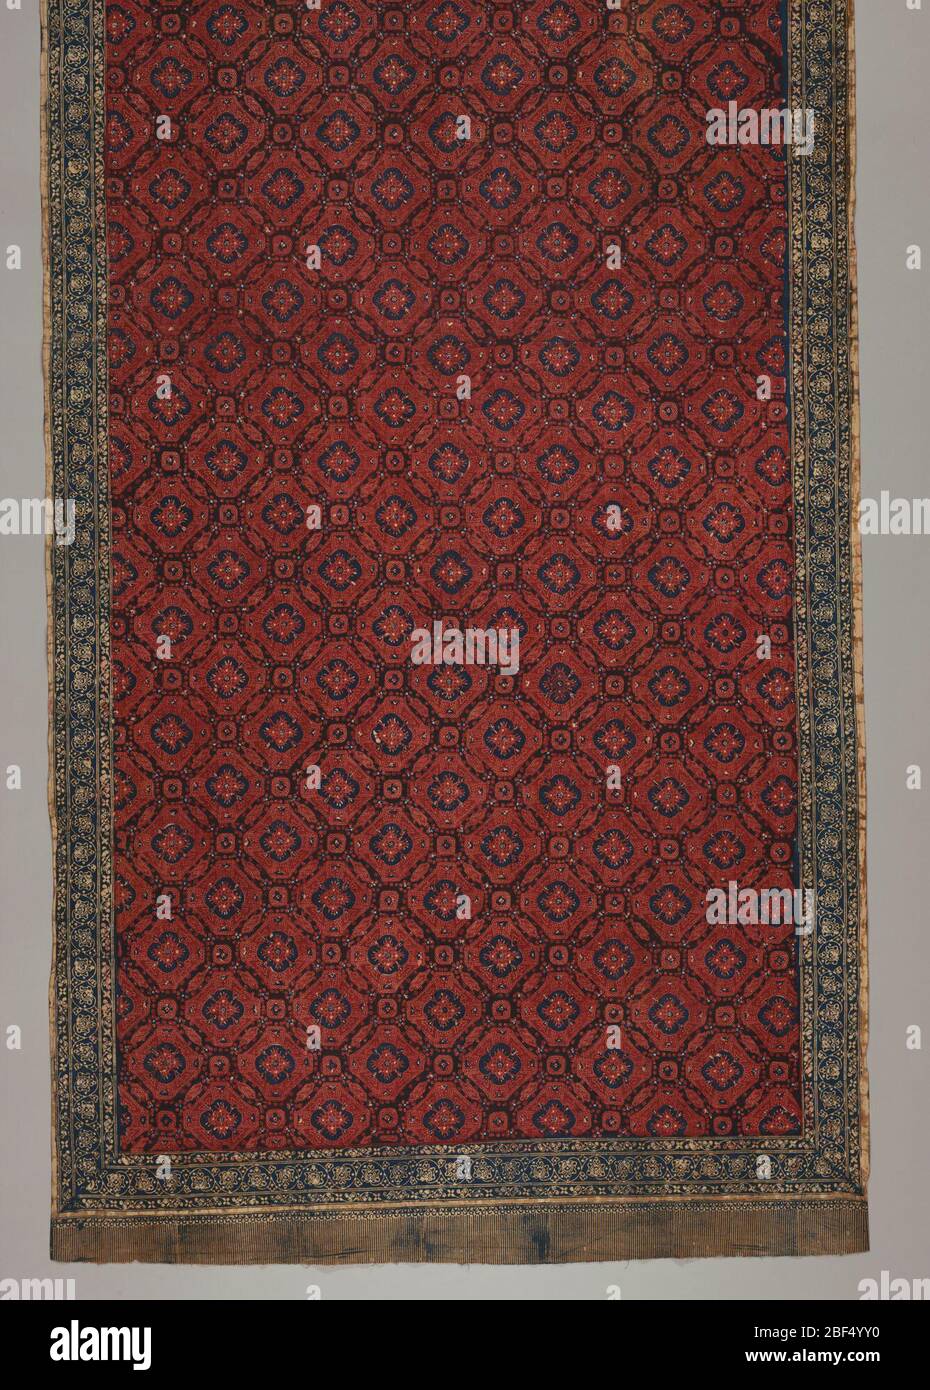 Sarong. Red and blue batik sarong. Shows 'ceplokkan' pattern: flowers or blossoms, symmetrically distributed over surface, stylized, star-like,and contained within a geometric shape. Borders show batiked on fringe. Stock Photo